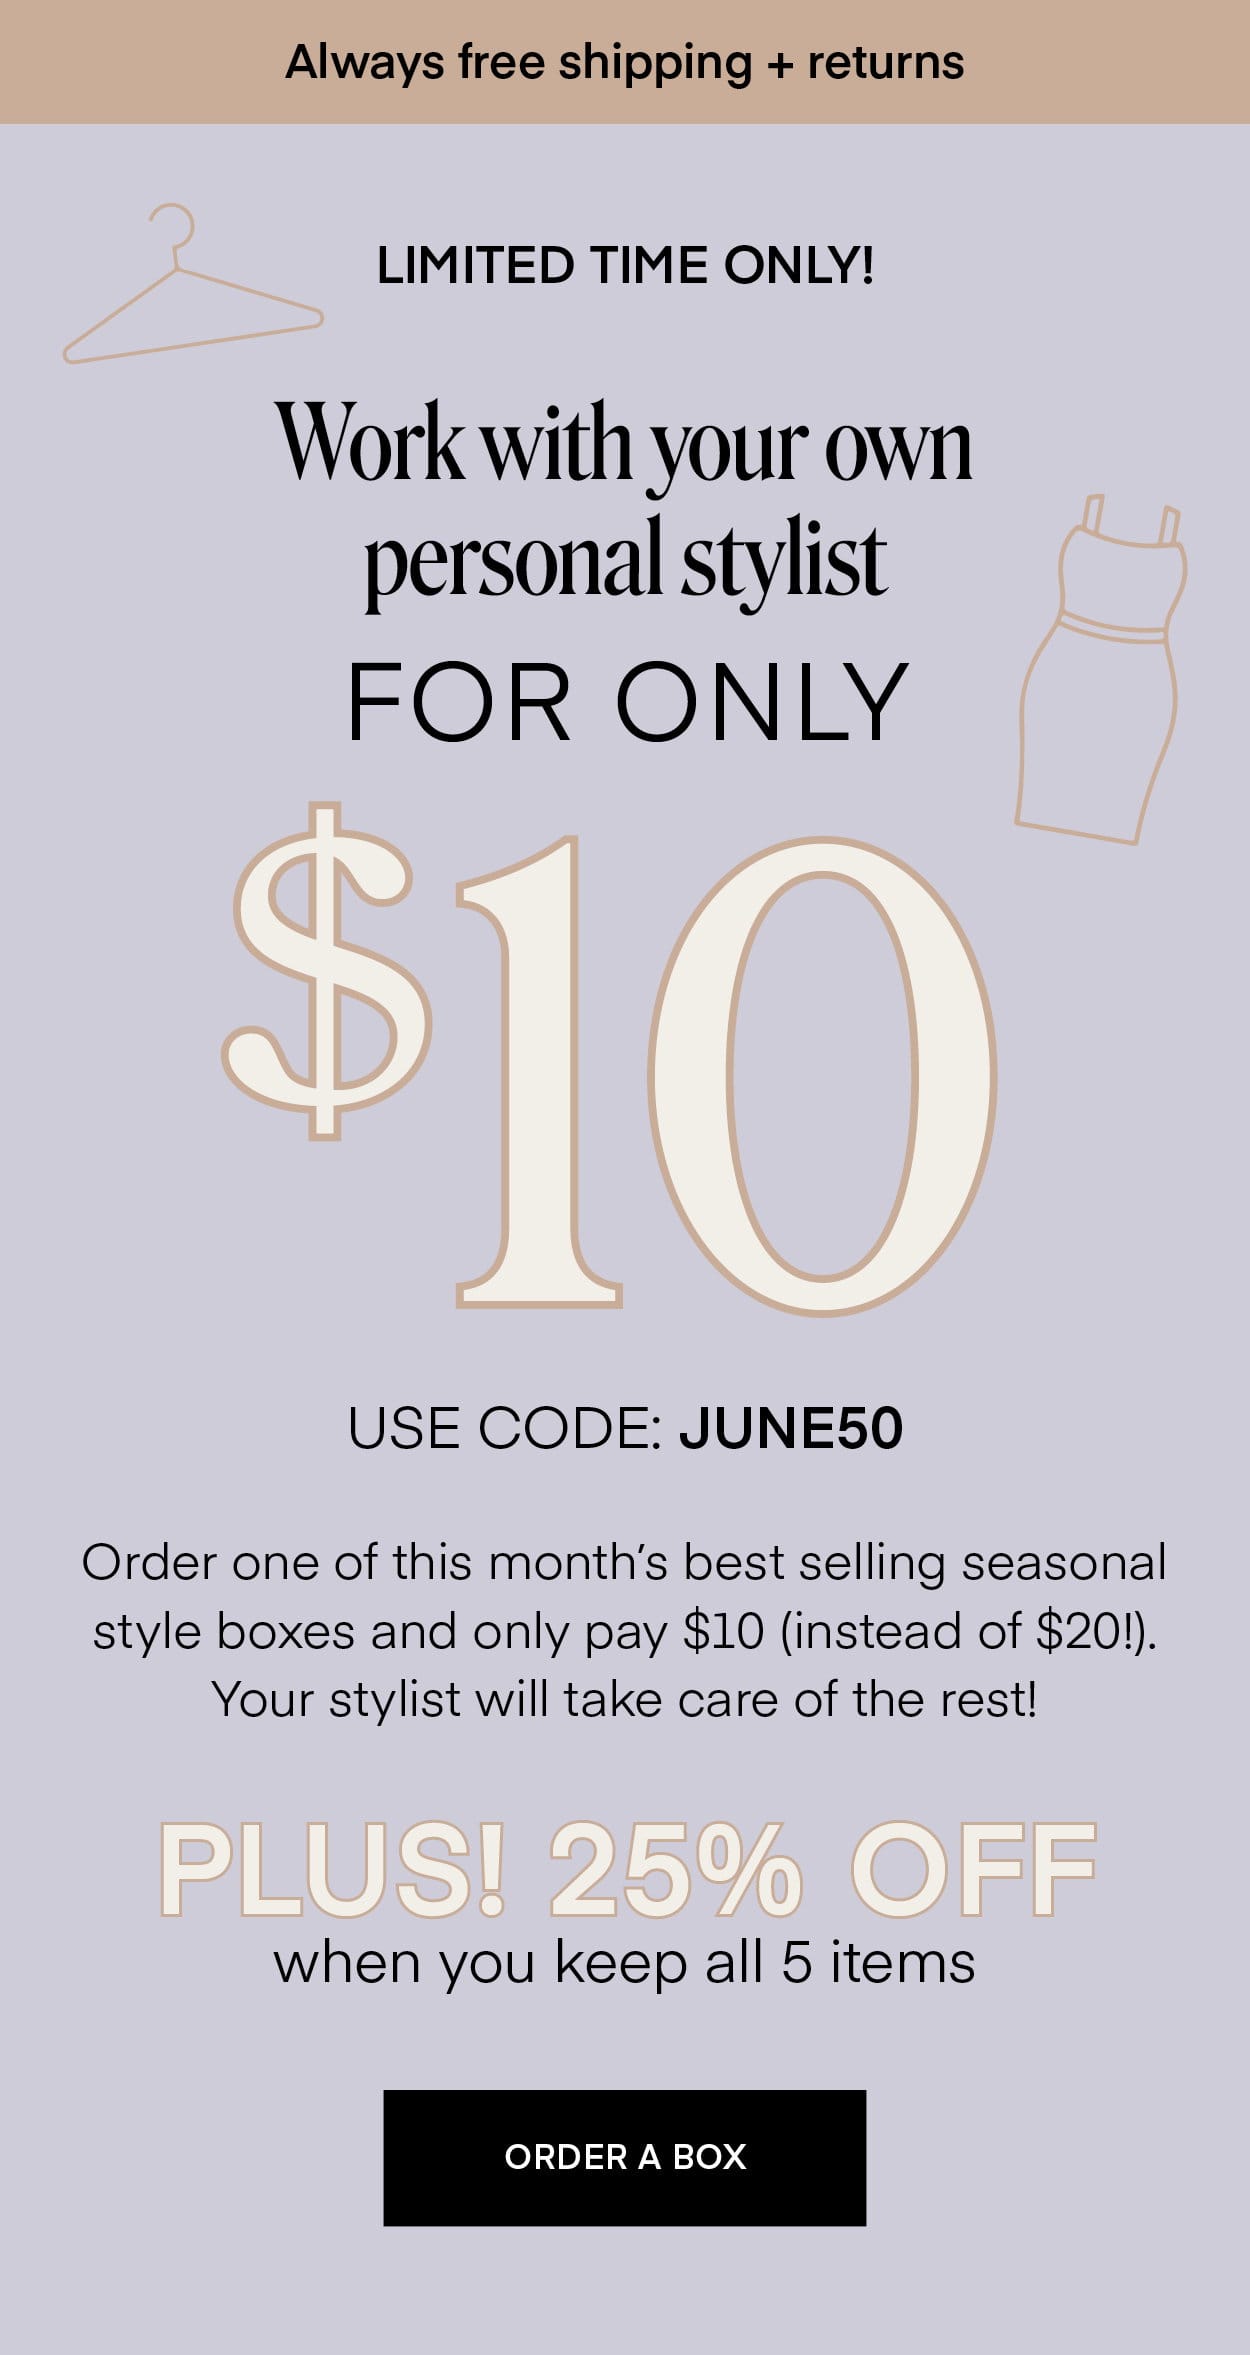 Always free shipping + returns LIMITED TIME ONLY! Work with your own personal stylist FOR ONLY \\$10 USE CODE: JUNE50 Order one of this month's best selling seasonal style boxes and only pay \\$10 (instead of \\$20!). Your stylist will take care of the rest! PLUS! 25% OFF when you keep all 5 items ORDER A BOX